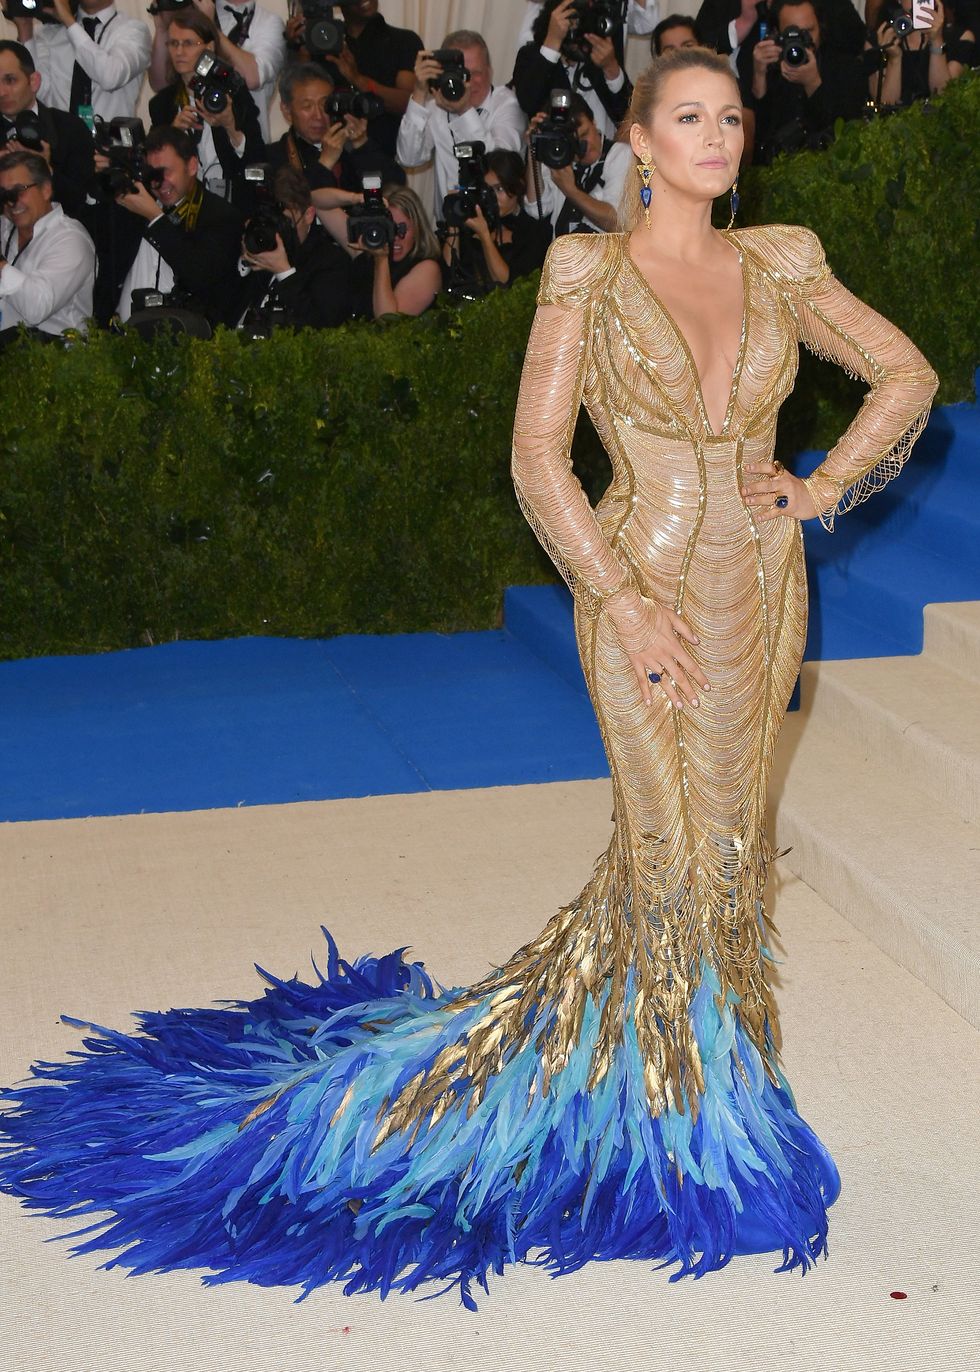 Blake Lively in Versace at the Met Gala